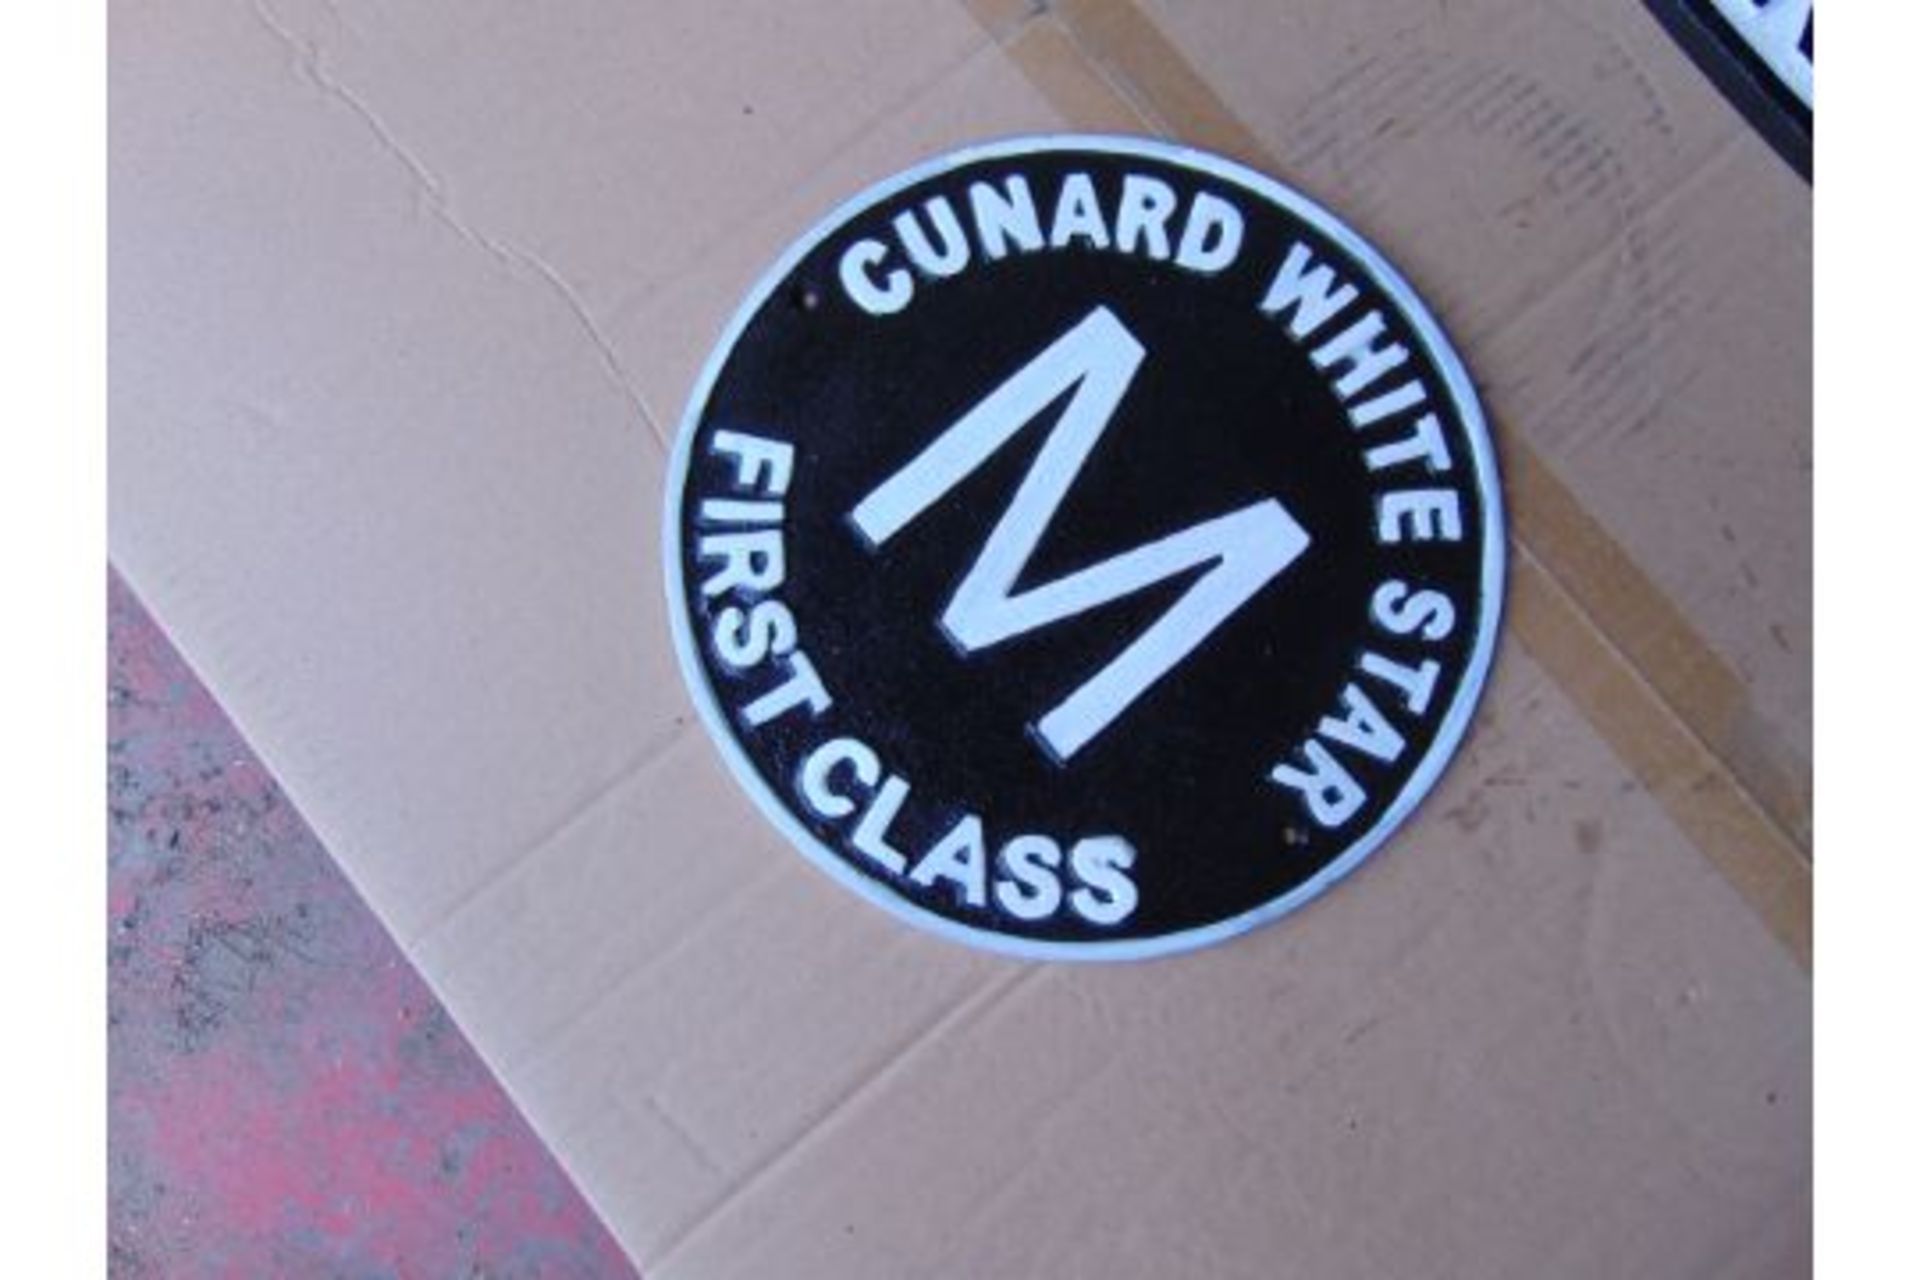 Titanic Cunard White Star First Class Hand Painted Cast Iron Wall Plaque 25cms Dia - Image 2 of 3